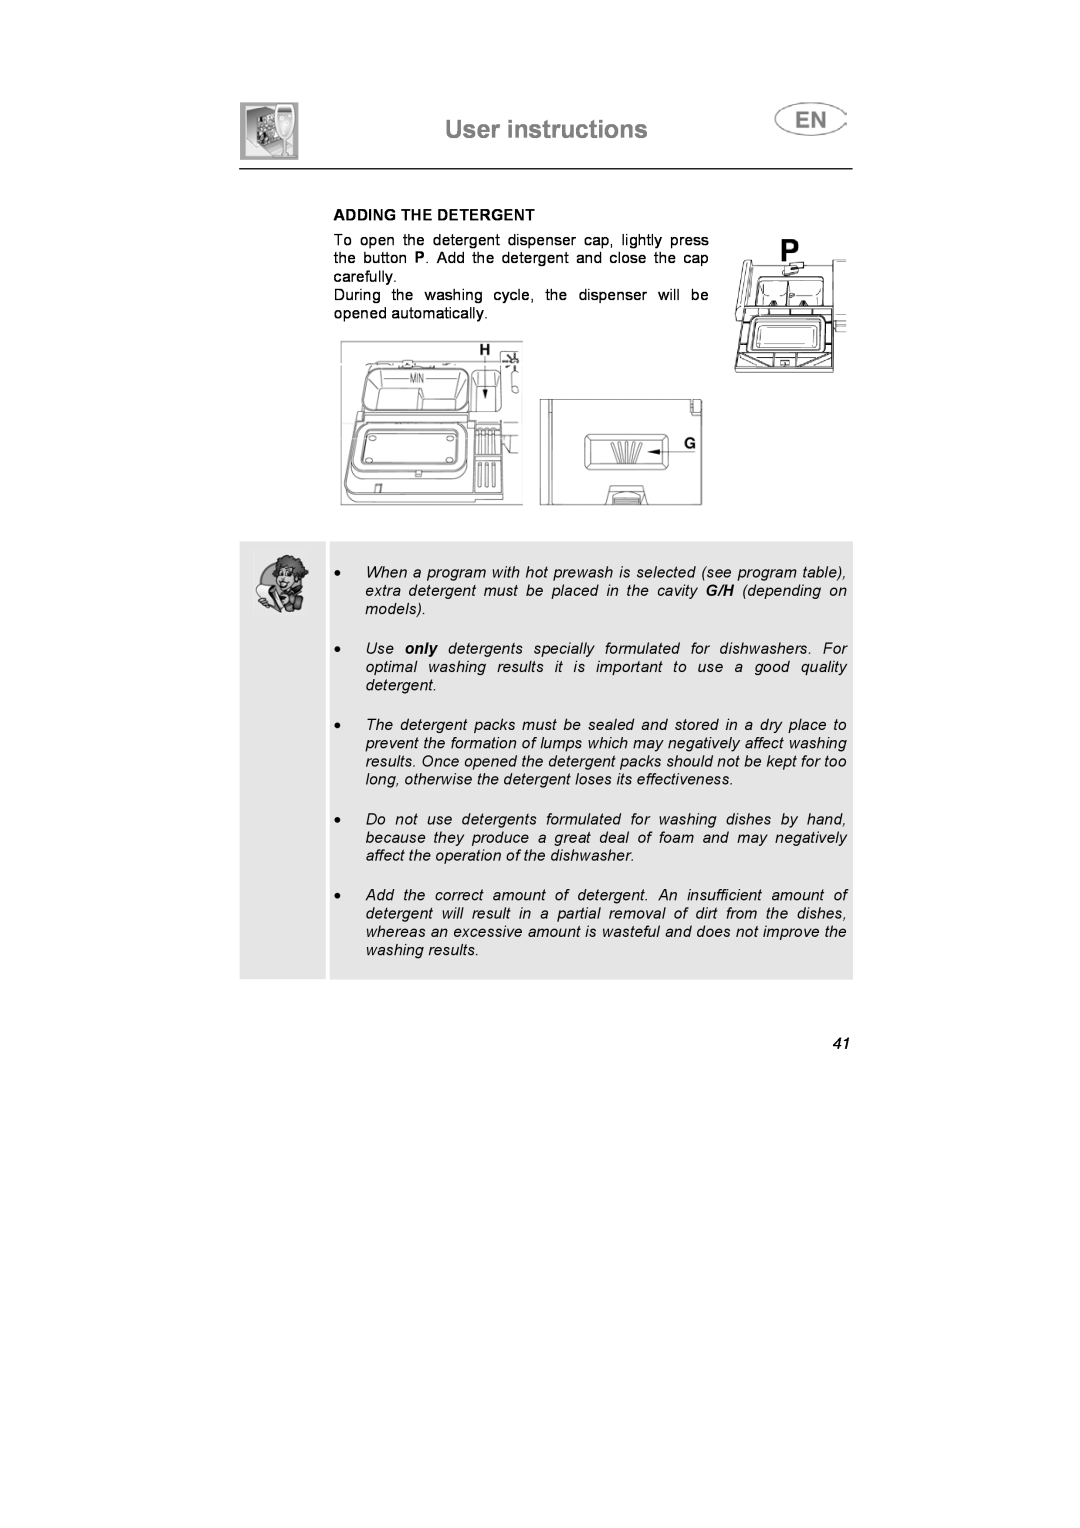 Smeg LSA653E User instructions, Adding The Detergent, During the washing cycle, the dispenser will be opened automatically 